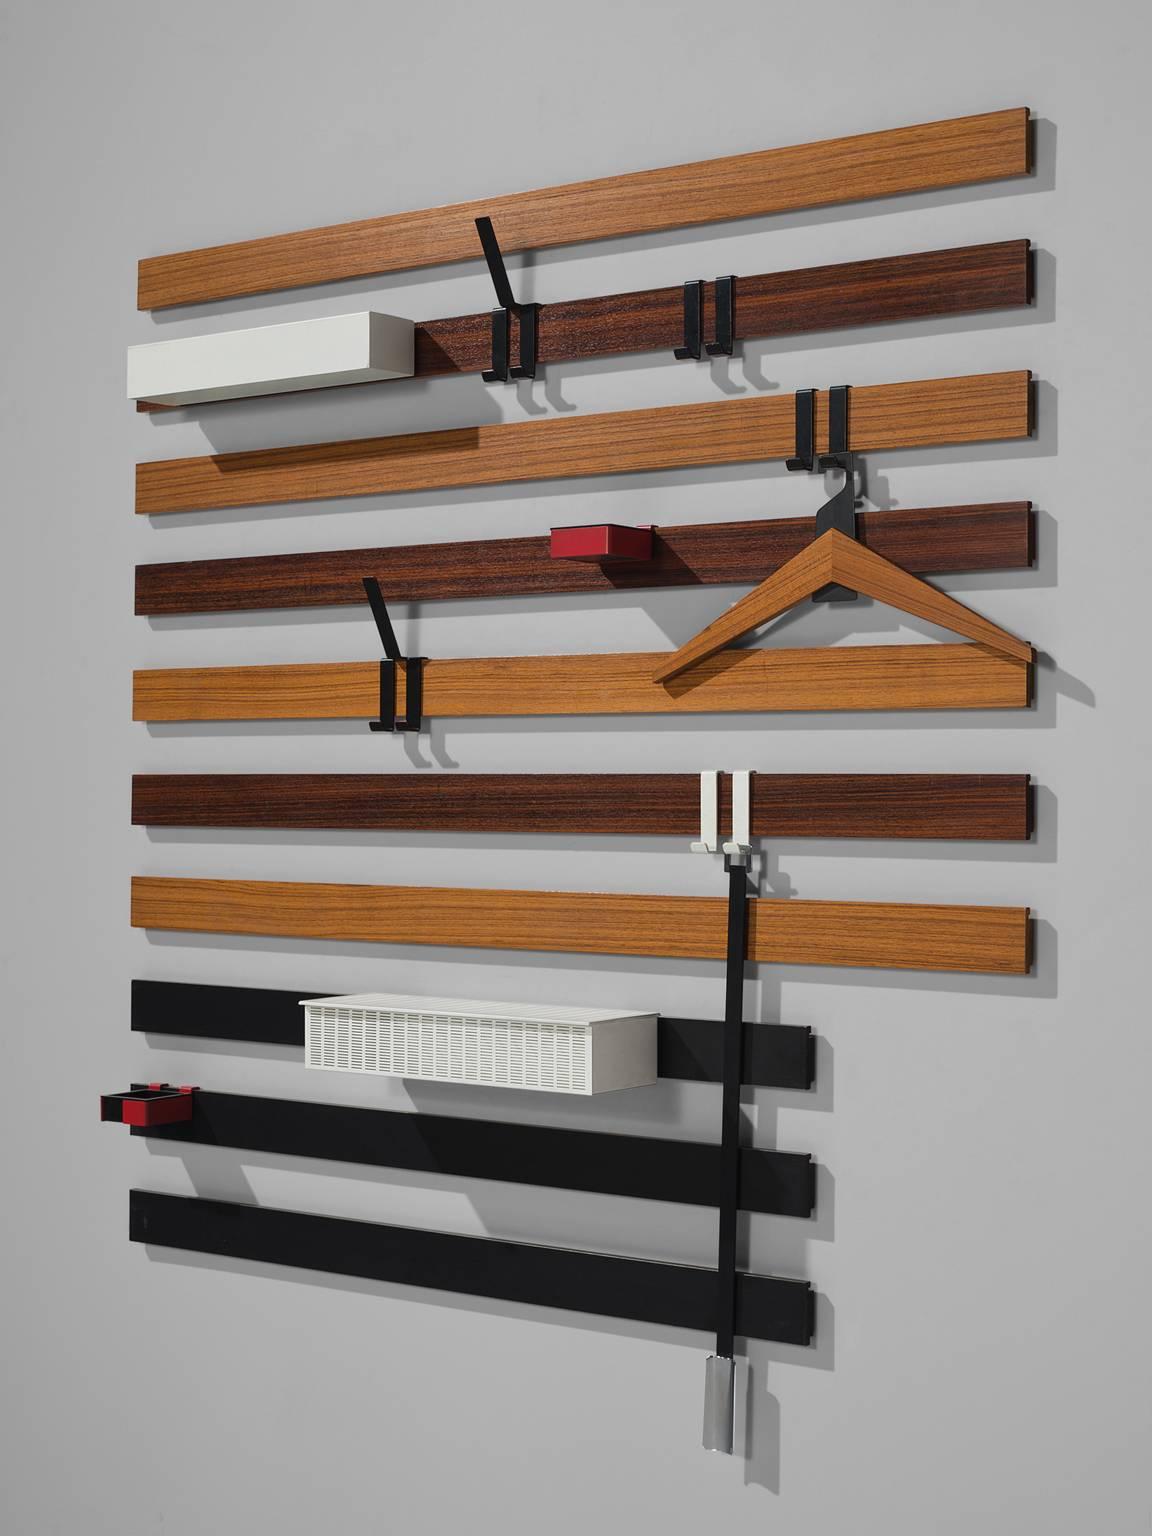 Rudolf Rochelt, coat rack, wood, metal, Germany, 1963.

This coat rack is designed by Rudolf Rochelt for Werkstätten and is part of the midcentury design collection. This minimalist, functional yet very aesthetic wall unit takes up very little space